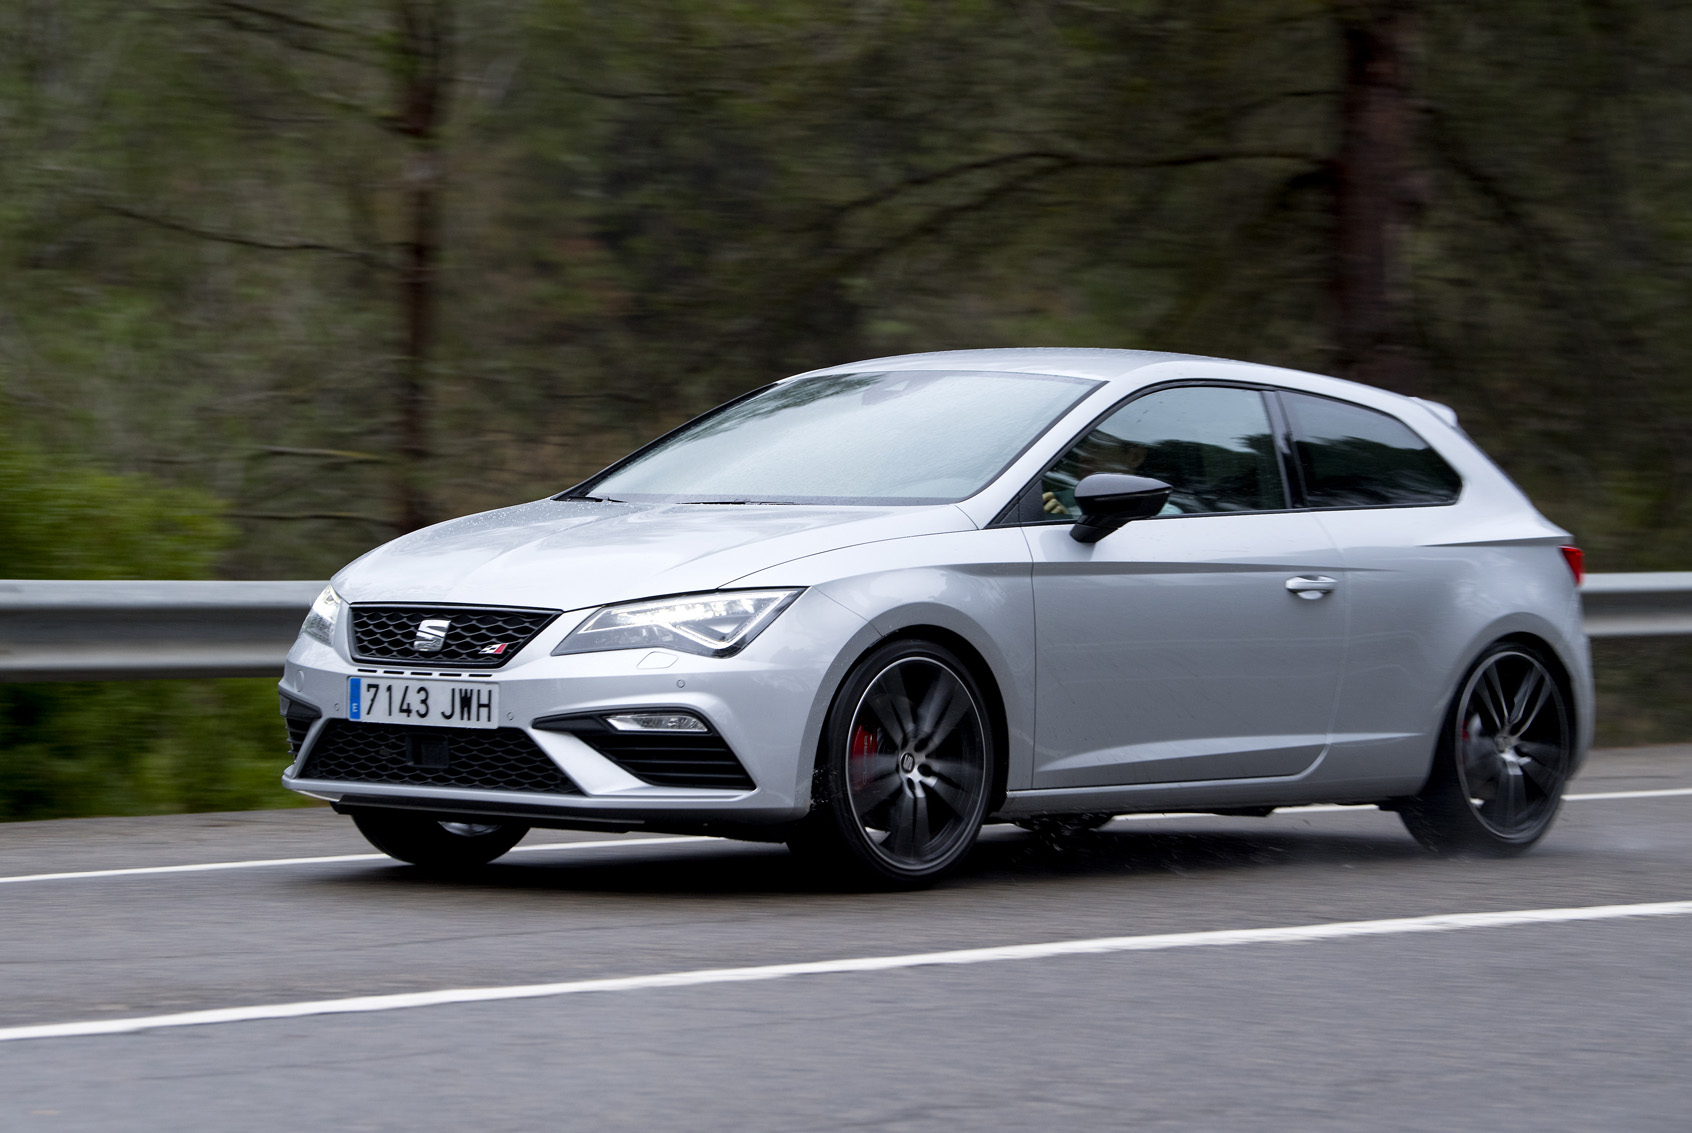 Seat Leon 2009 Hatchback (2009 - 2013) reviews, technical data, prices